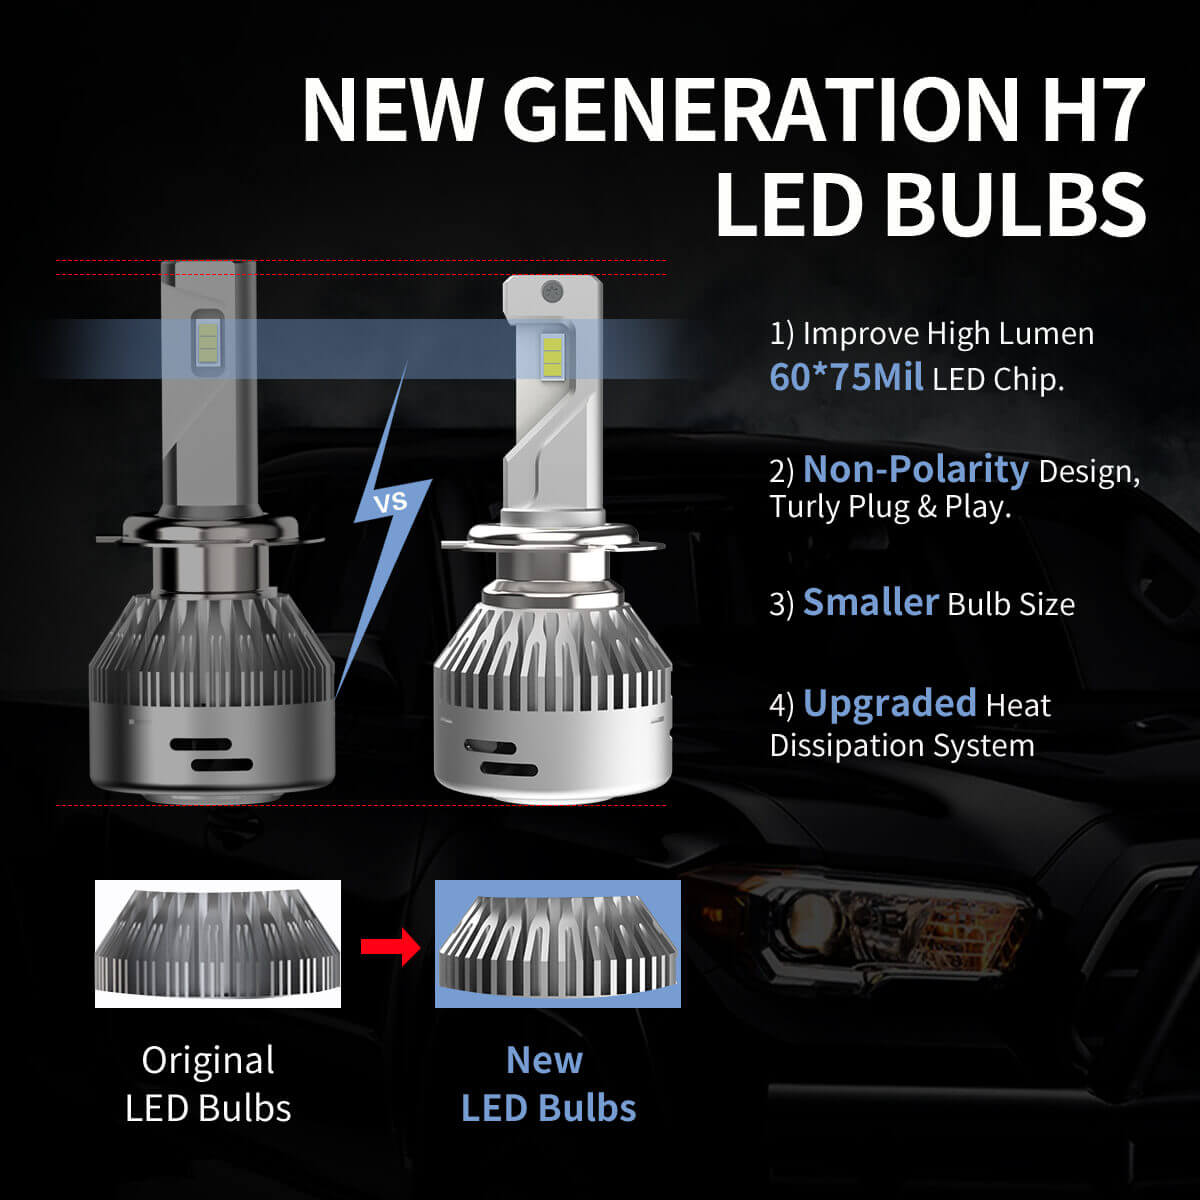 LASFIT H7 LED Bulbs for VW BMW Mercedes | Plug and Play